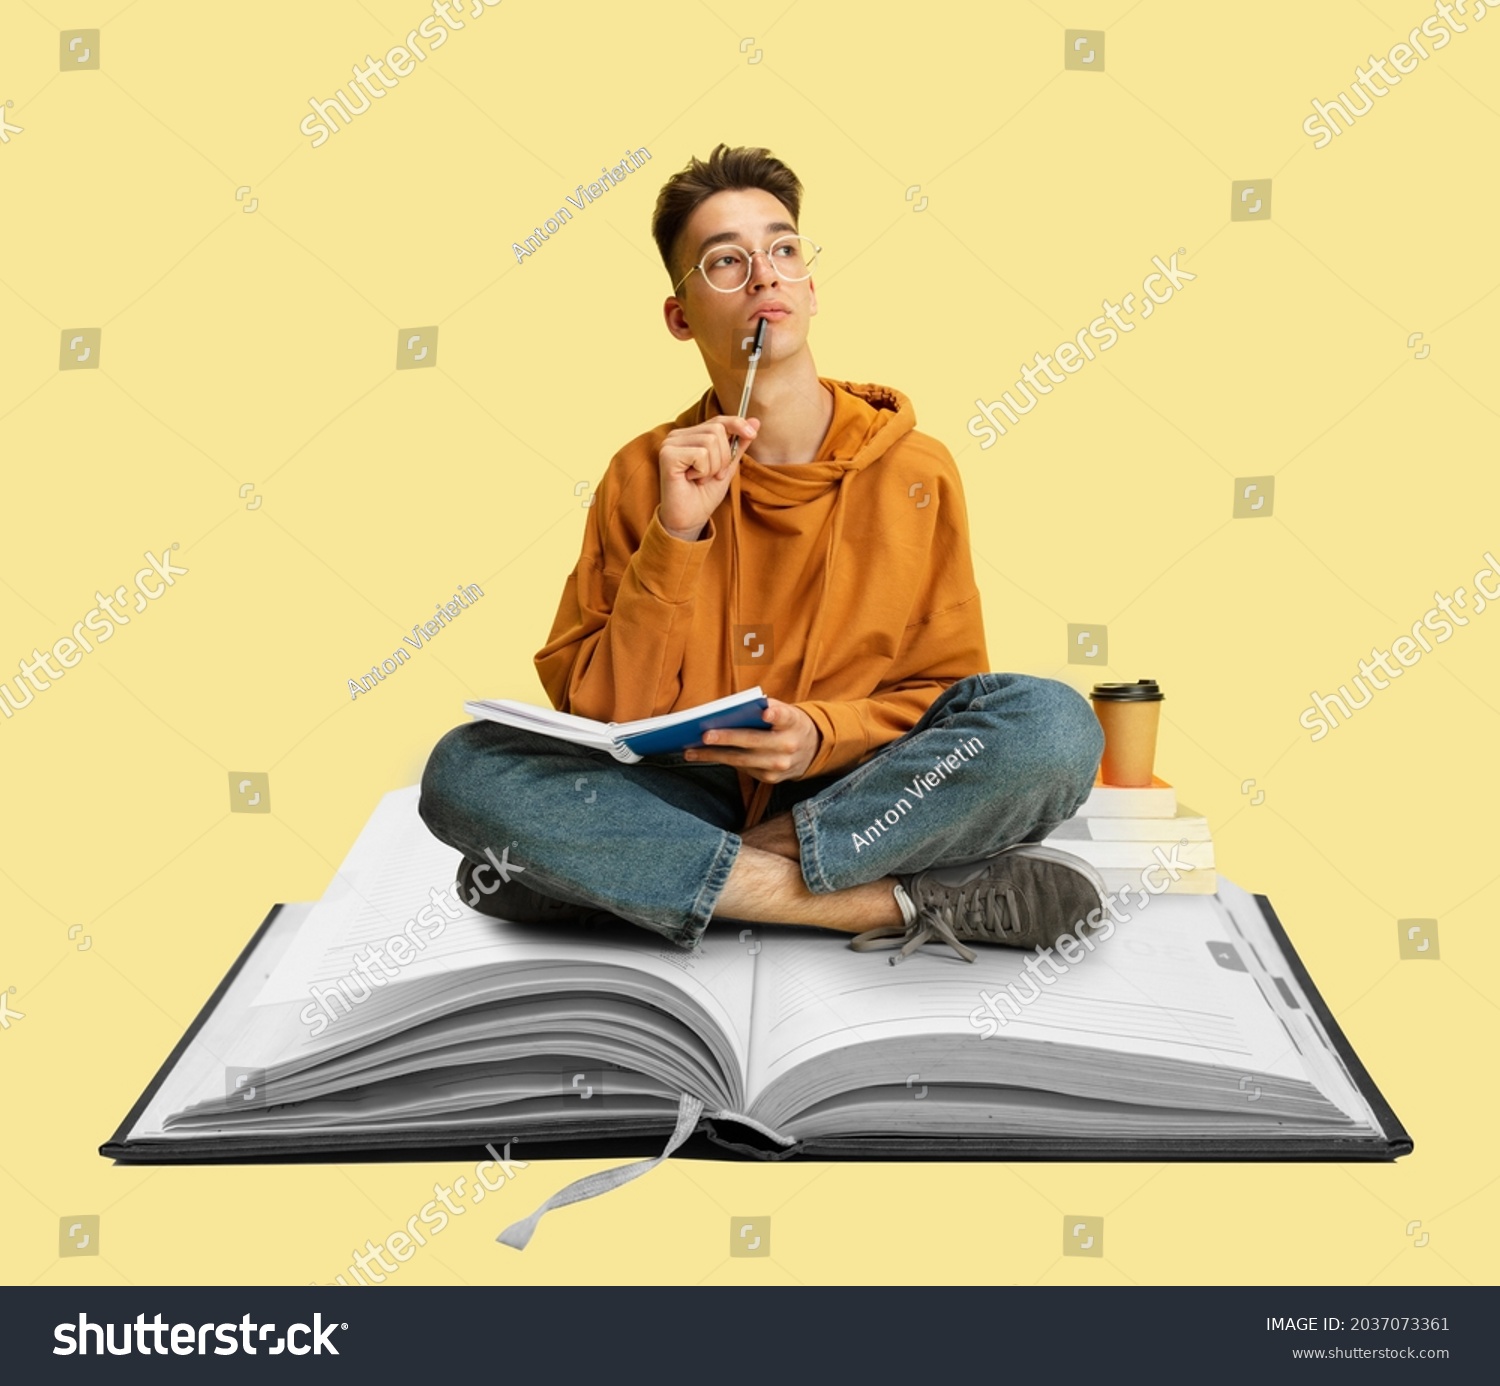 Contemporary art collage of male student sitting on notebook and thinking, making notes. Importance of education. Support online schools. Concept of online study, education, ad #2037073361